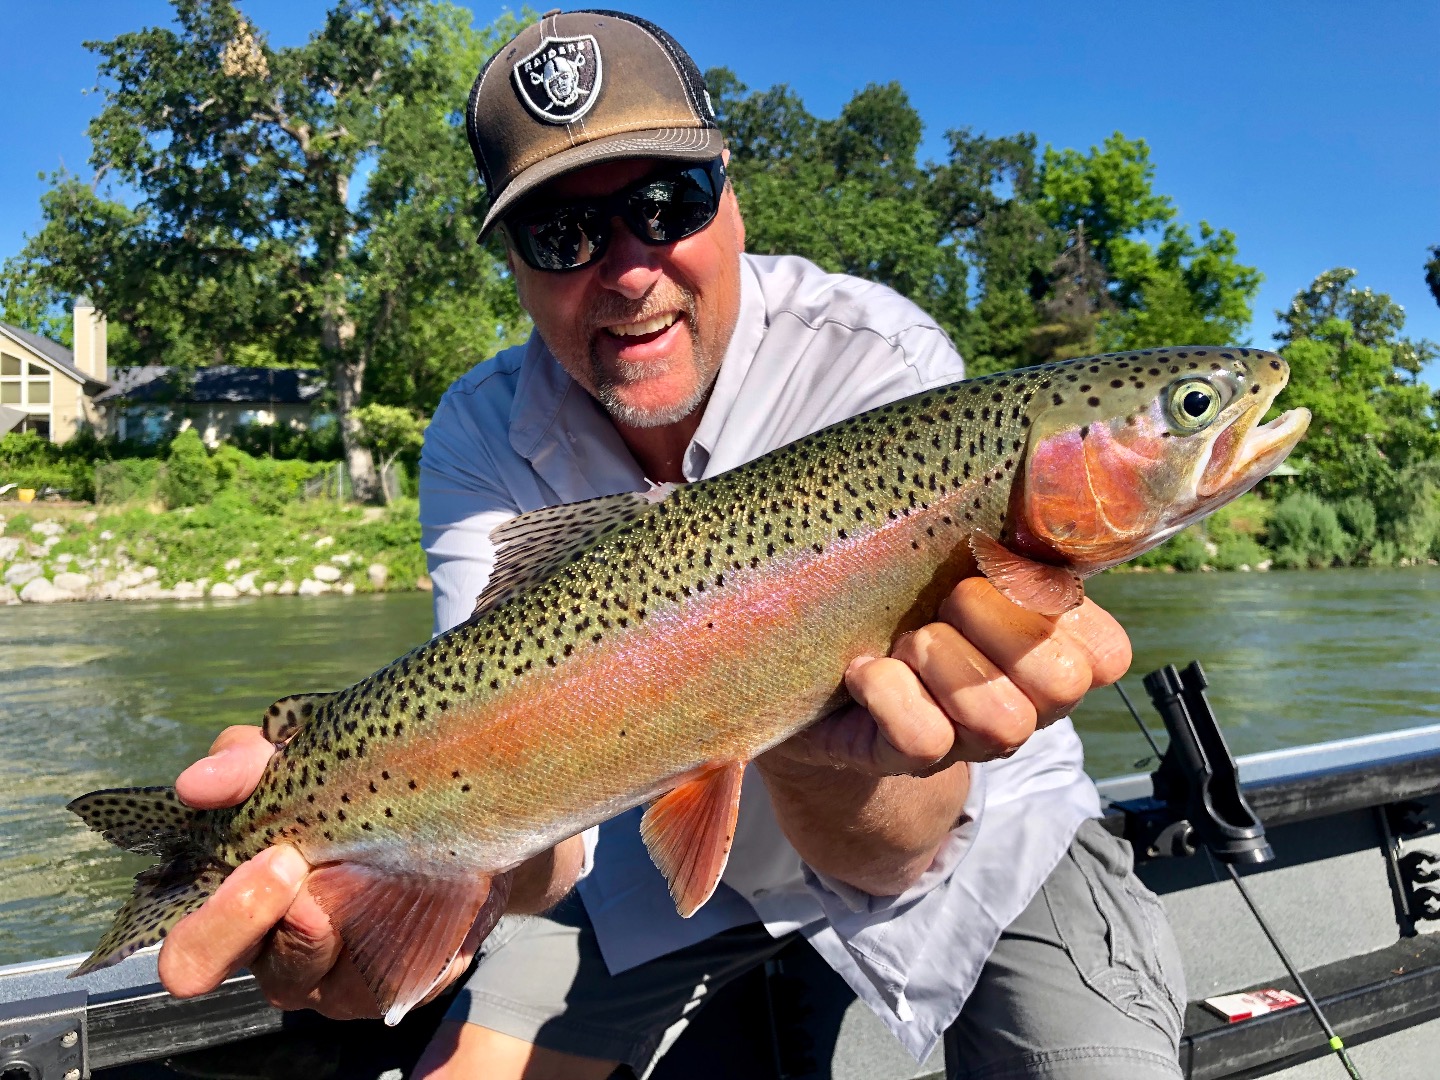 Sac River trout fishing continues to produce.